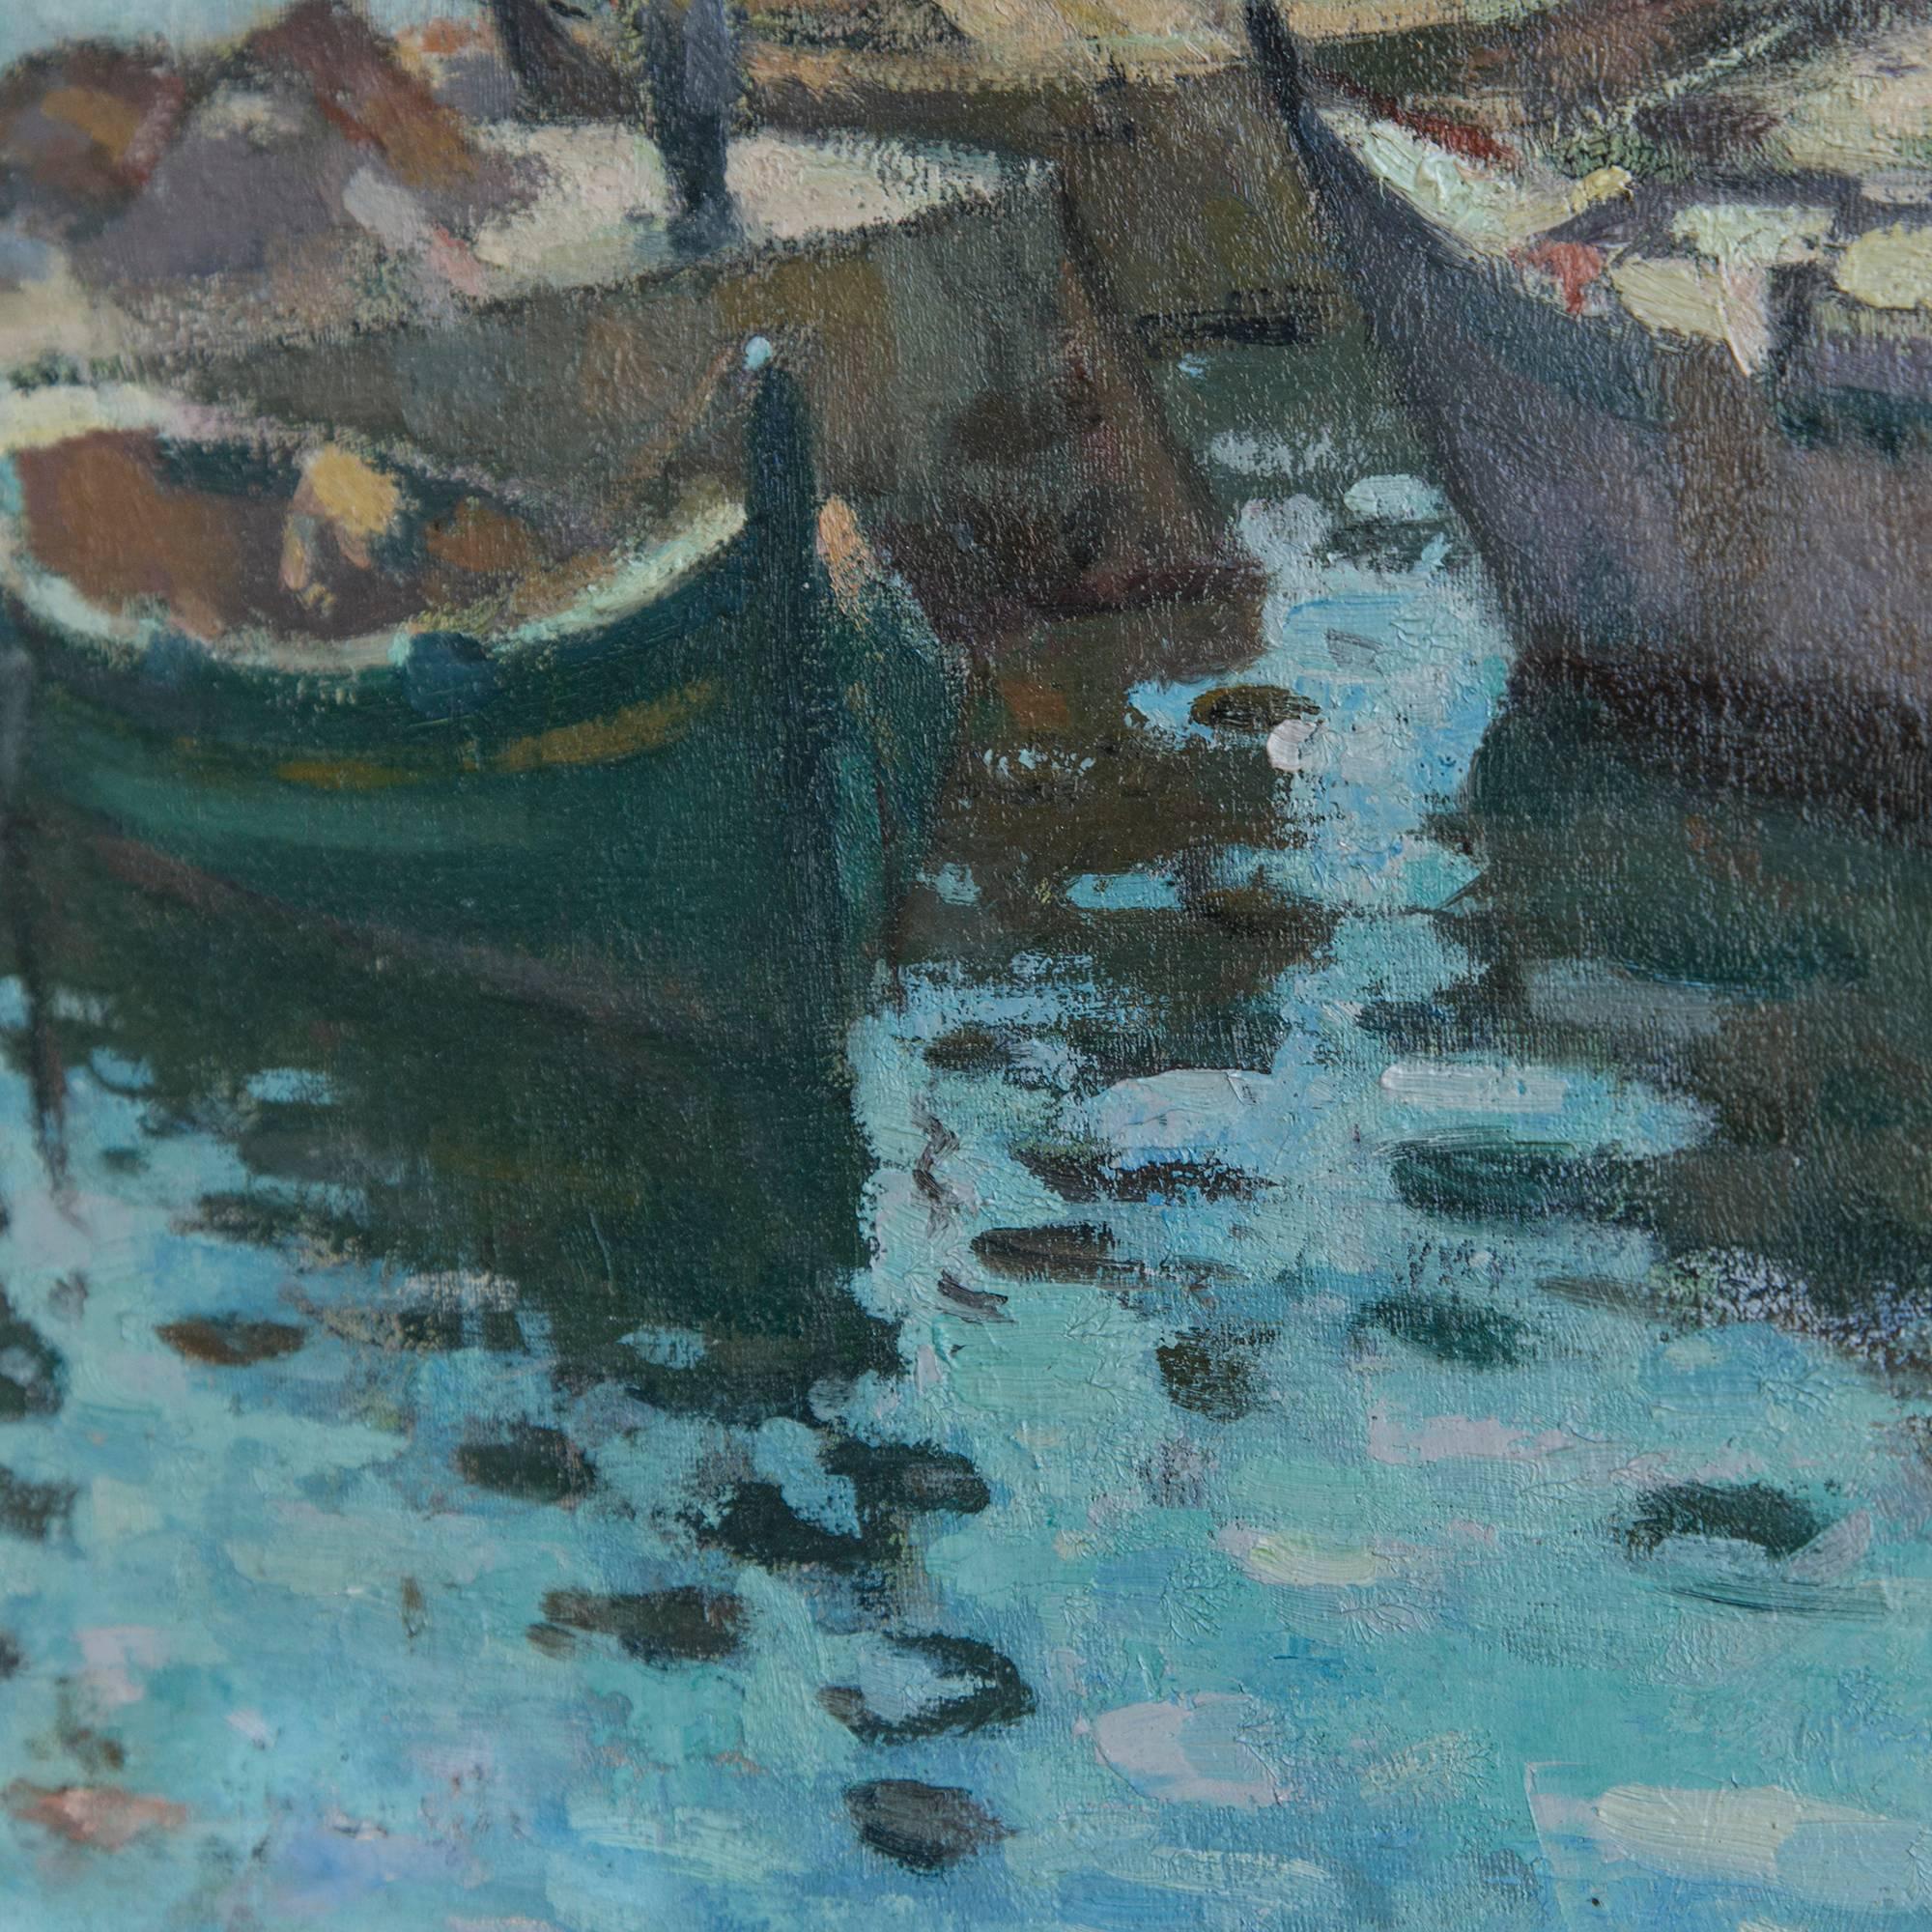 Hand-Painted 20th Century French Impressionist Oil Painting of Boats in Mediterranean Harbor